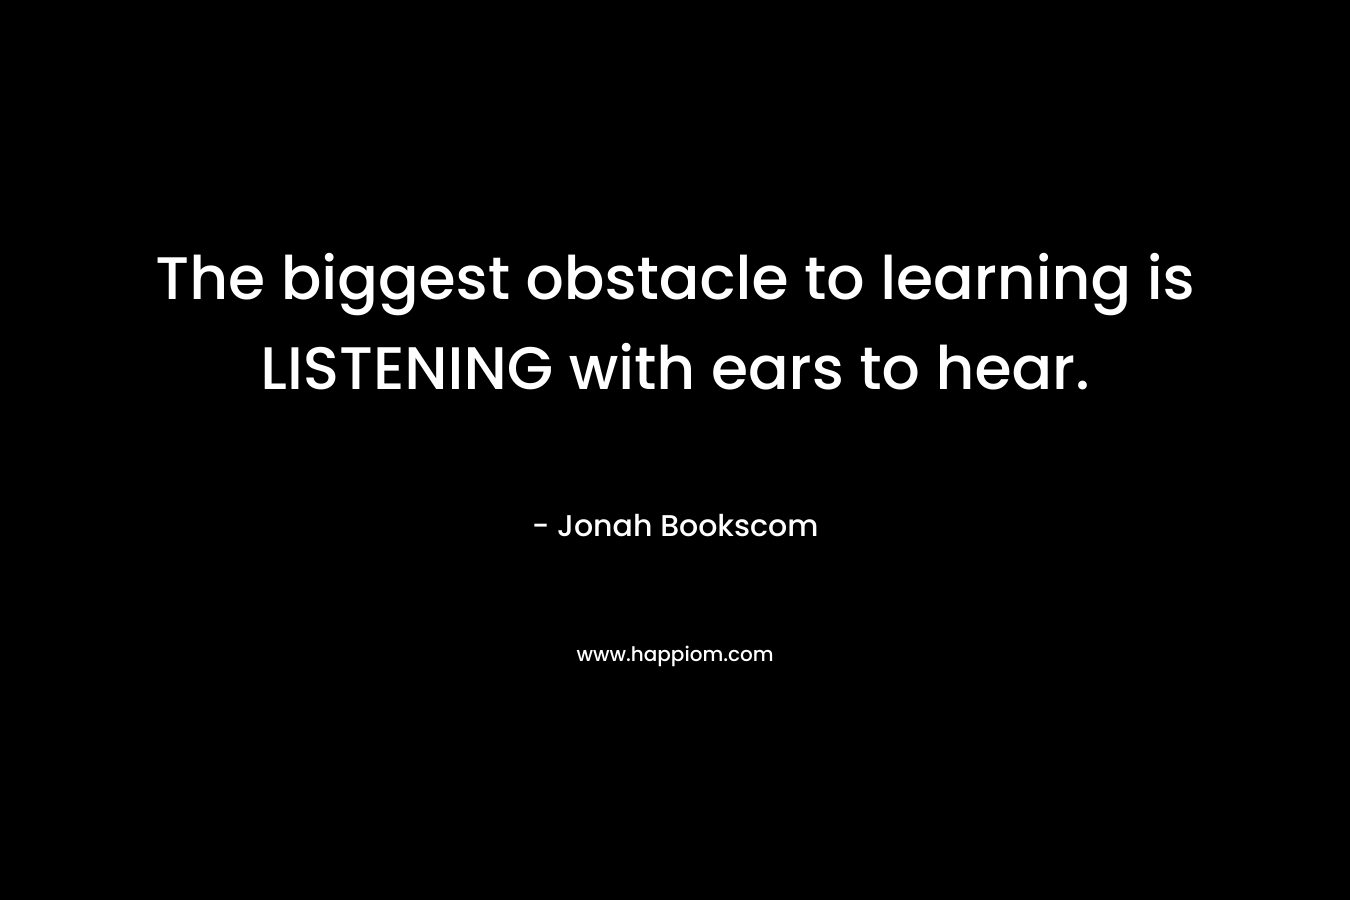 The biggest obstacle to learning is LISTENING with ears to hear. – Jonah Bookscom